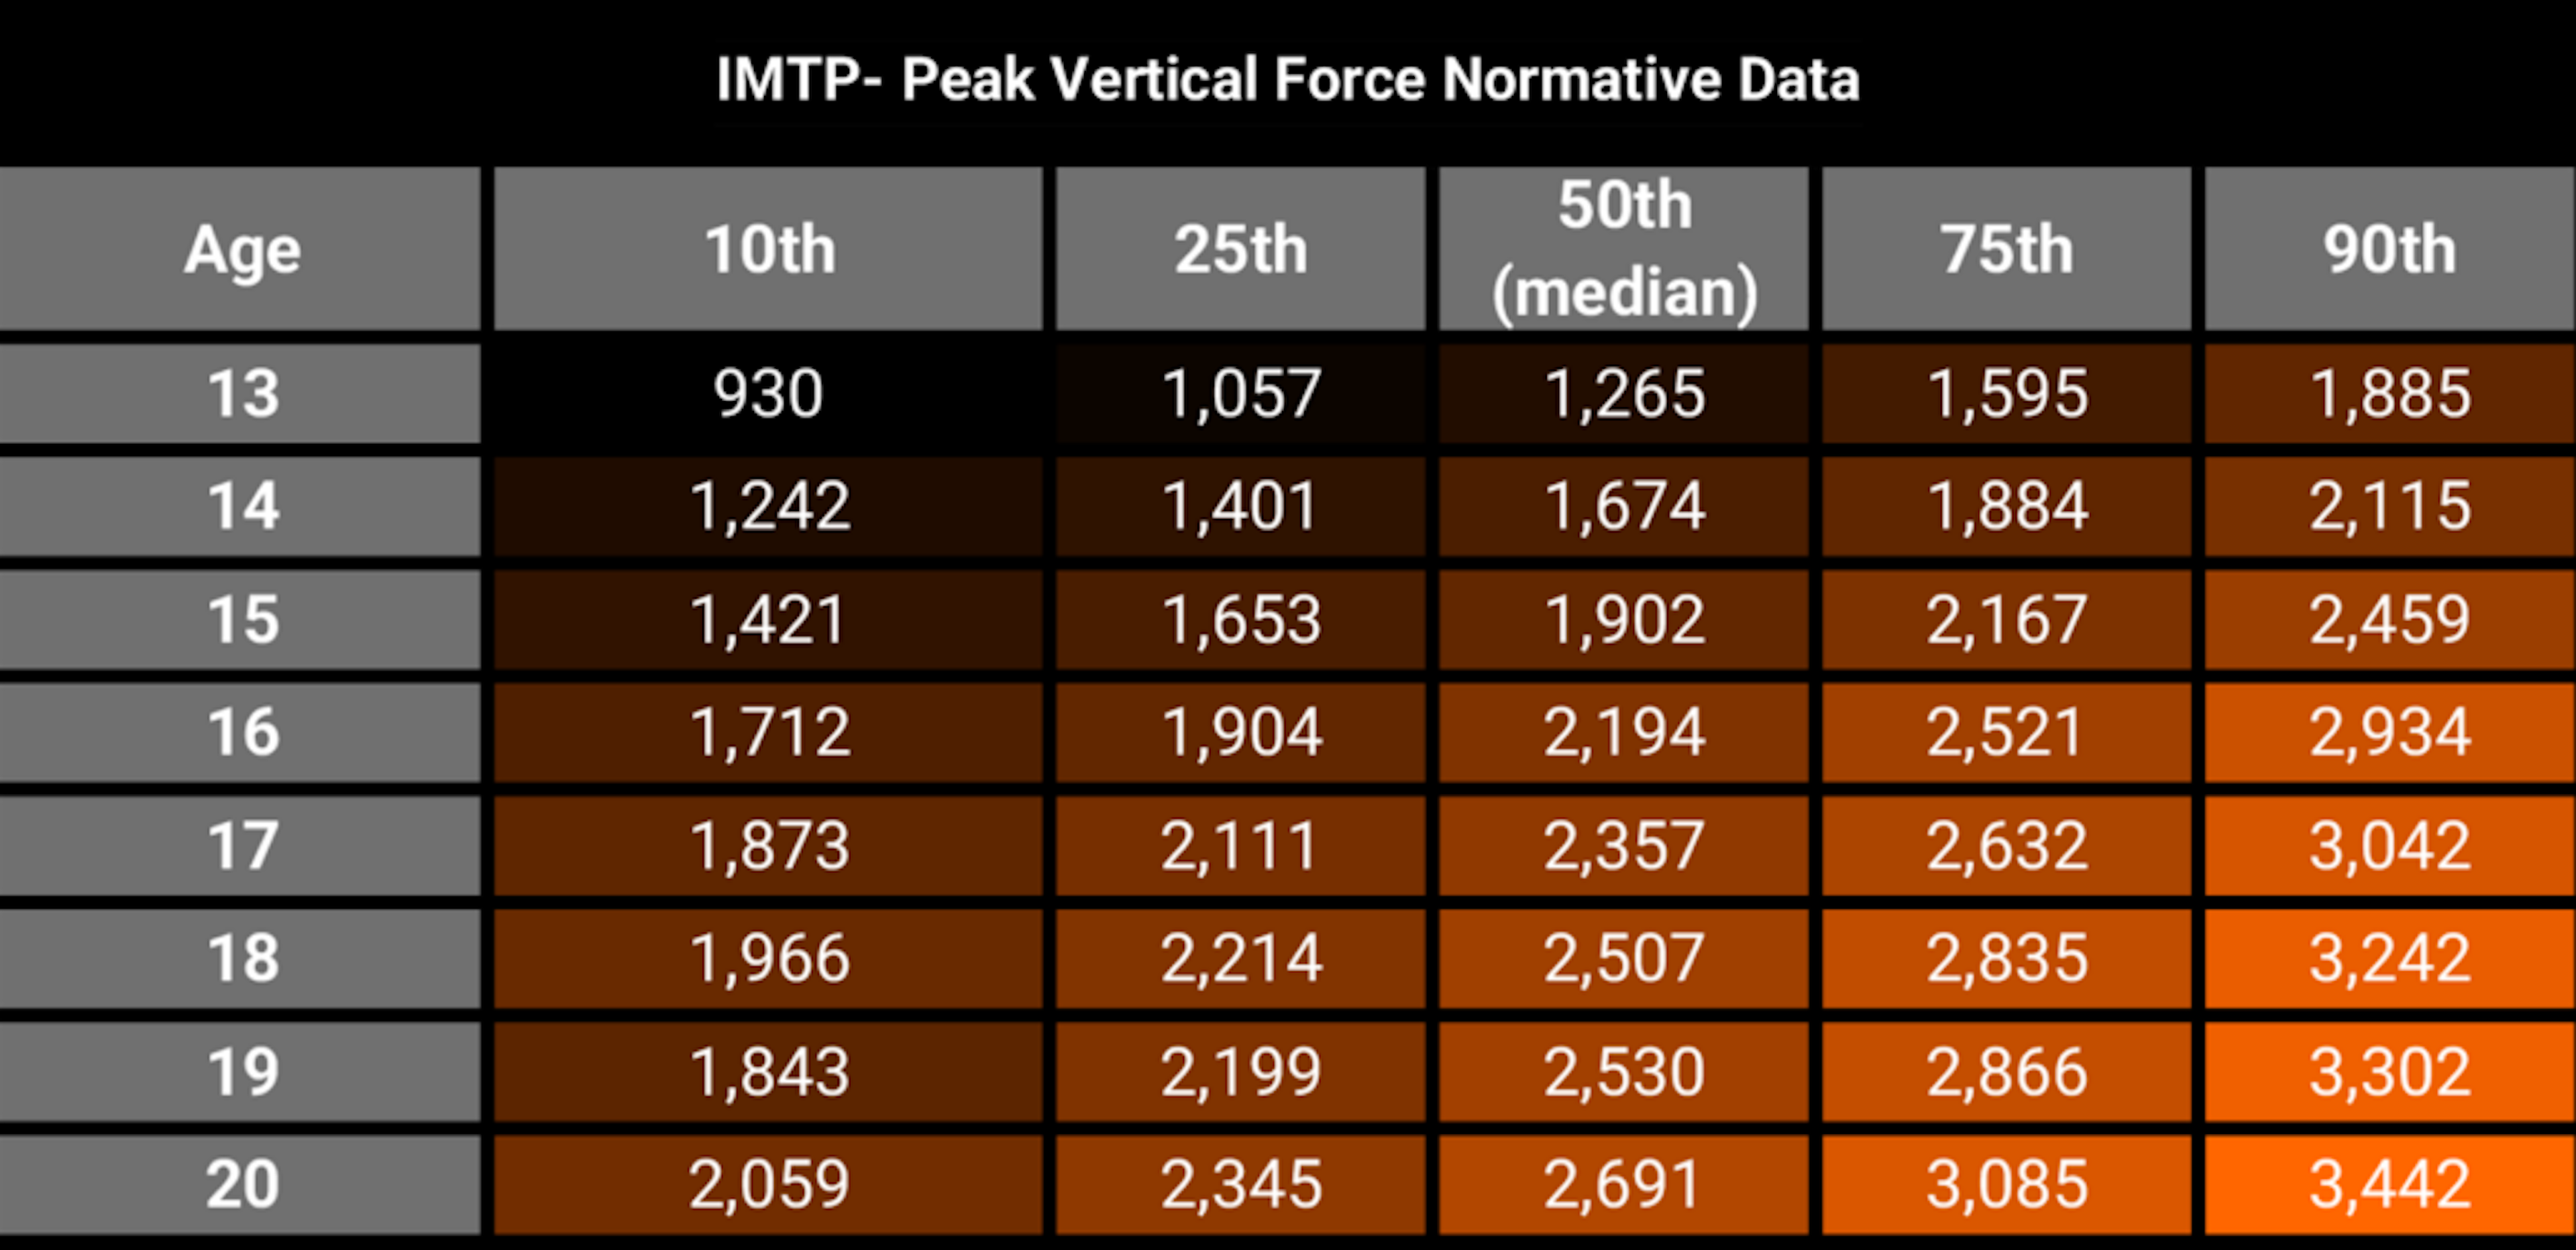 From academy to professional football level normative data (for Peak Vertical Force (N) in IMTP captured with ForceDecks).